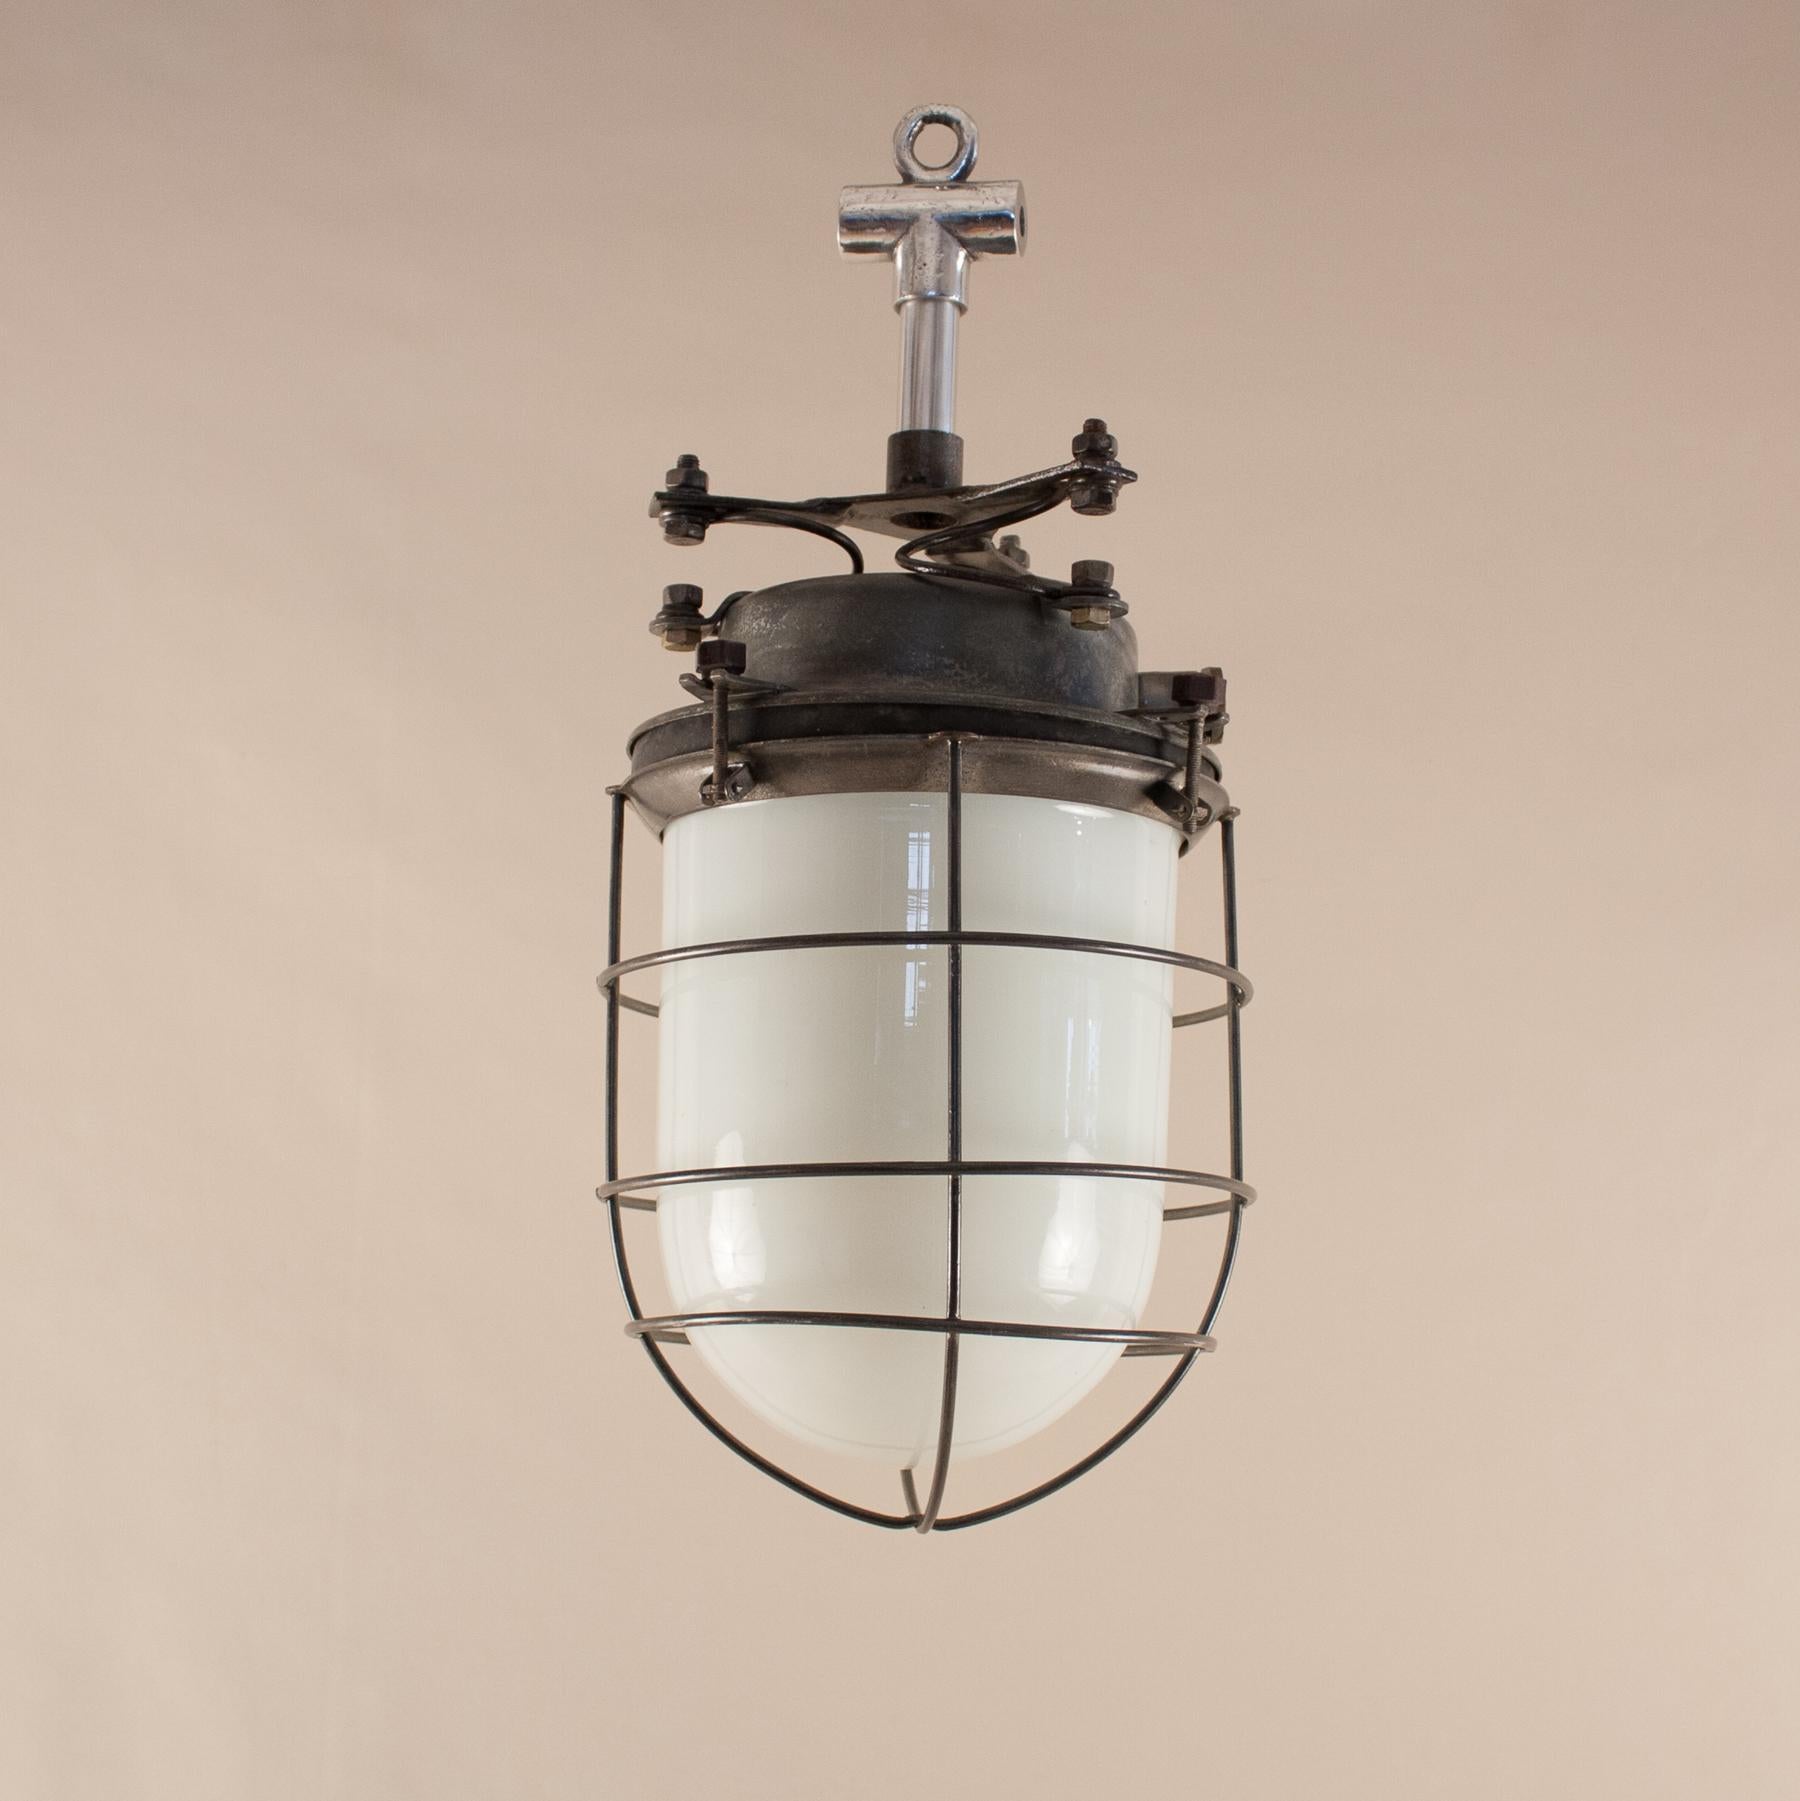 A group of six 1960s maritime ship's galley pendant lights from Eastern Europe, each with a milk glass capsule housed in a steel cage and topped with a shock-absorbing steel assembly cap. The replaced aluminum stem is optional. These midcentury